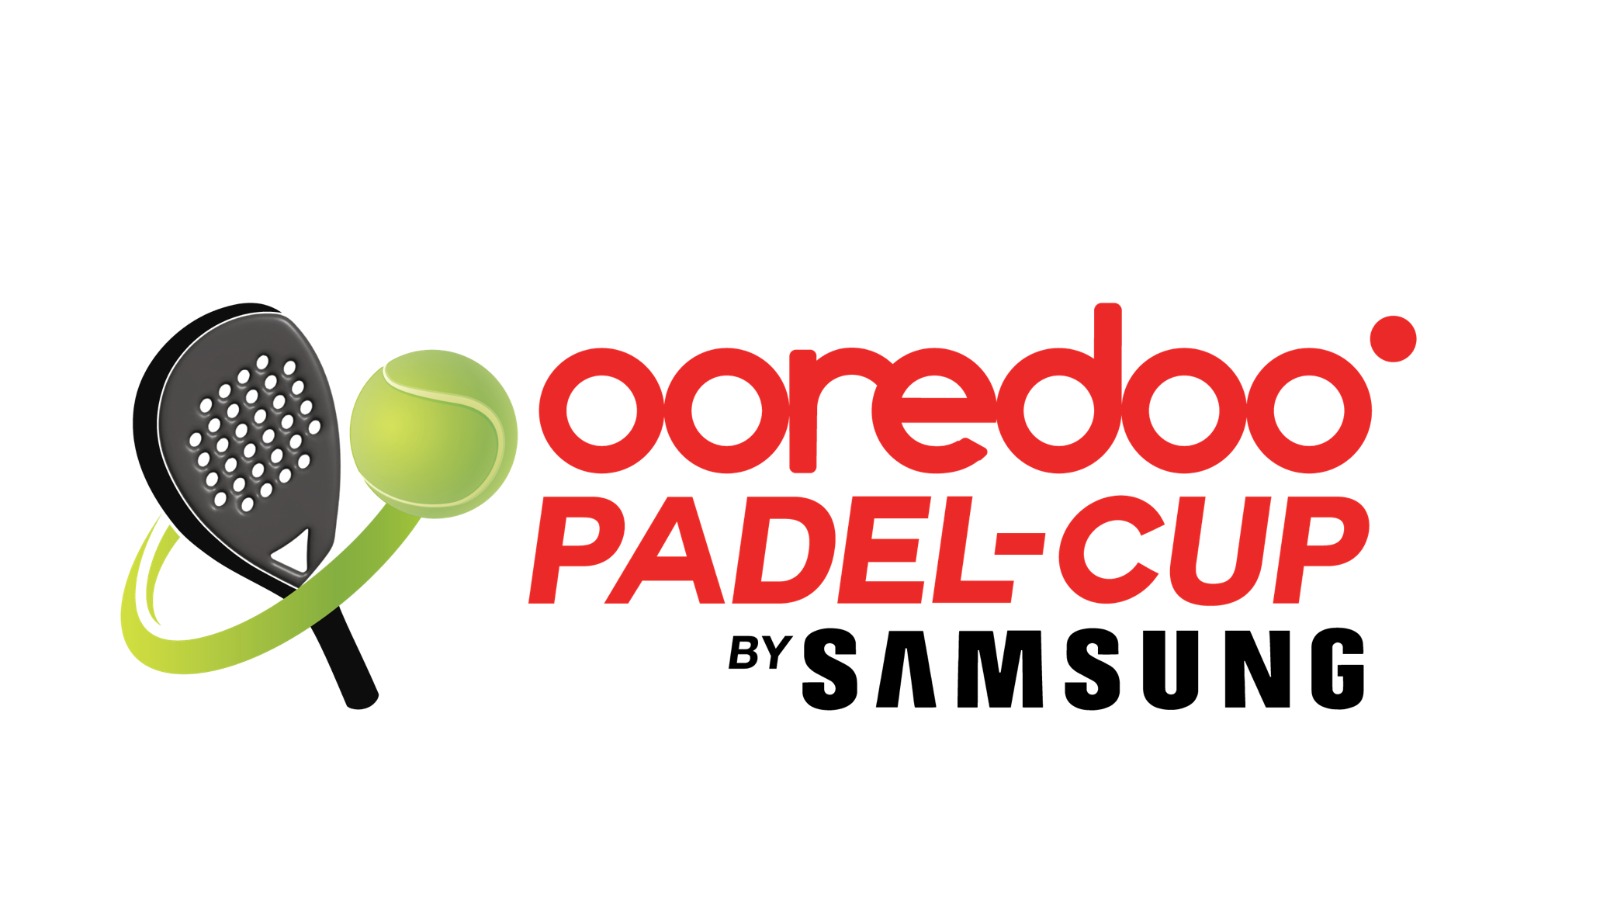 Ooredoo Padel Cup By Samsung Le Padel accessible à tous